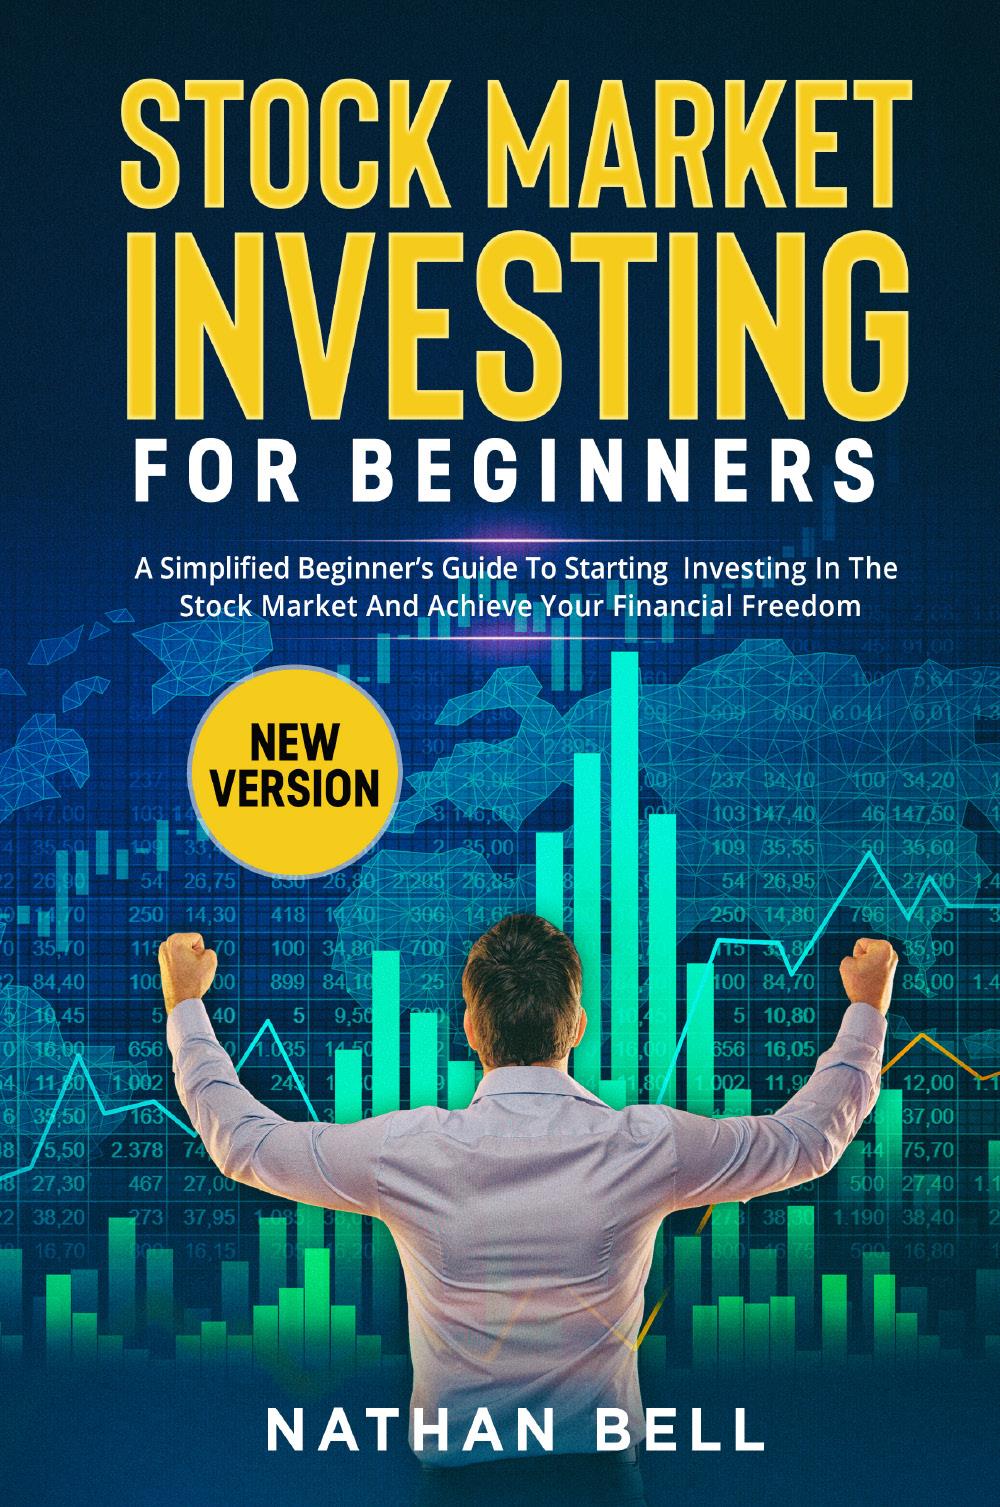 Stock market investing for beginners (New Version). A Simplified Beginner’s Guide To Starting Investing In The Stock Market And Achieve Your Financial Freedom